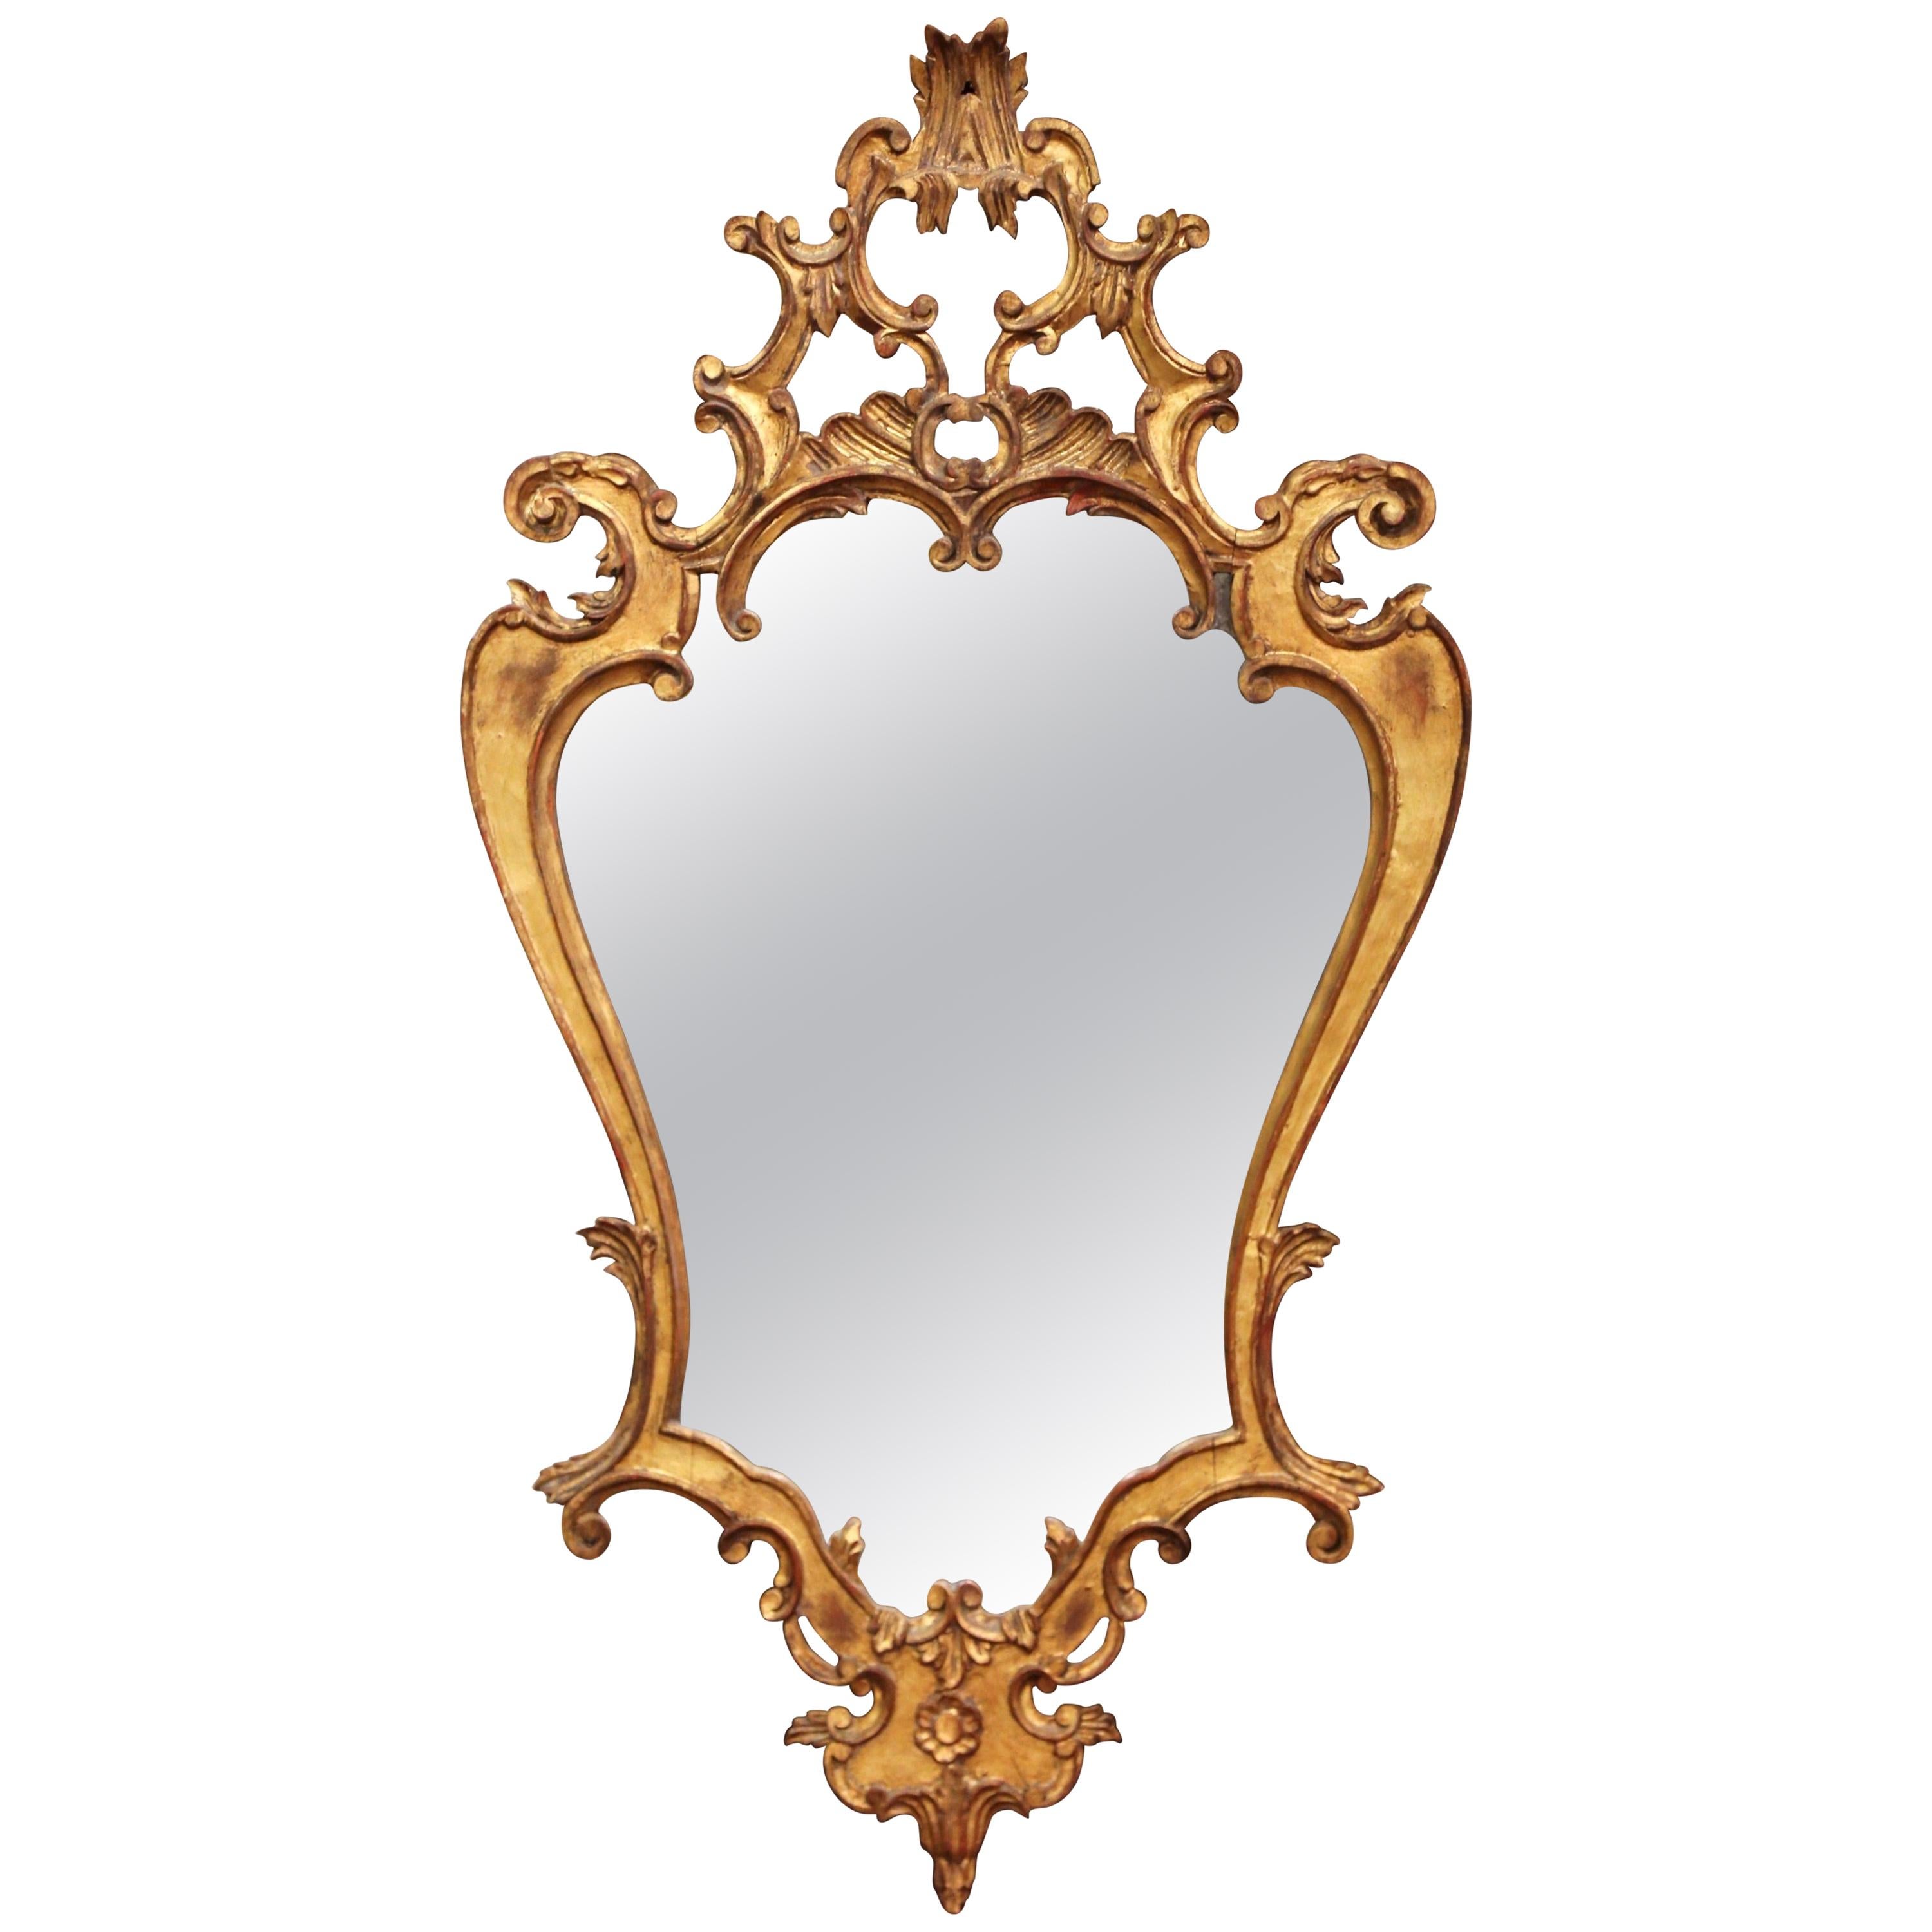 Early 20th Century Italian Rococo Carved Giltwood Wall Mirror